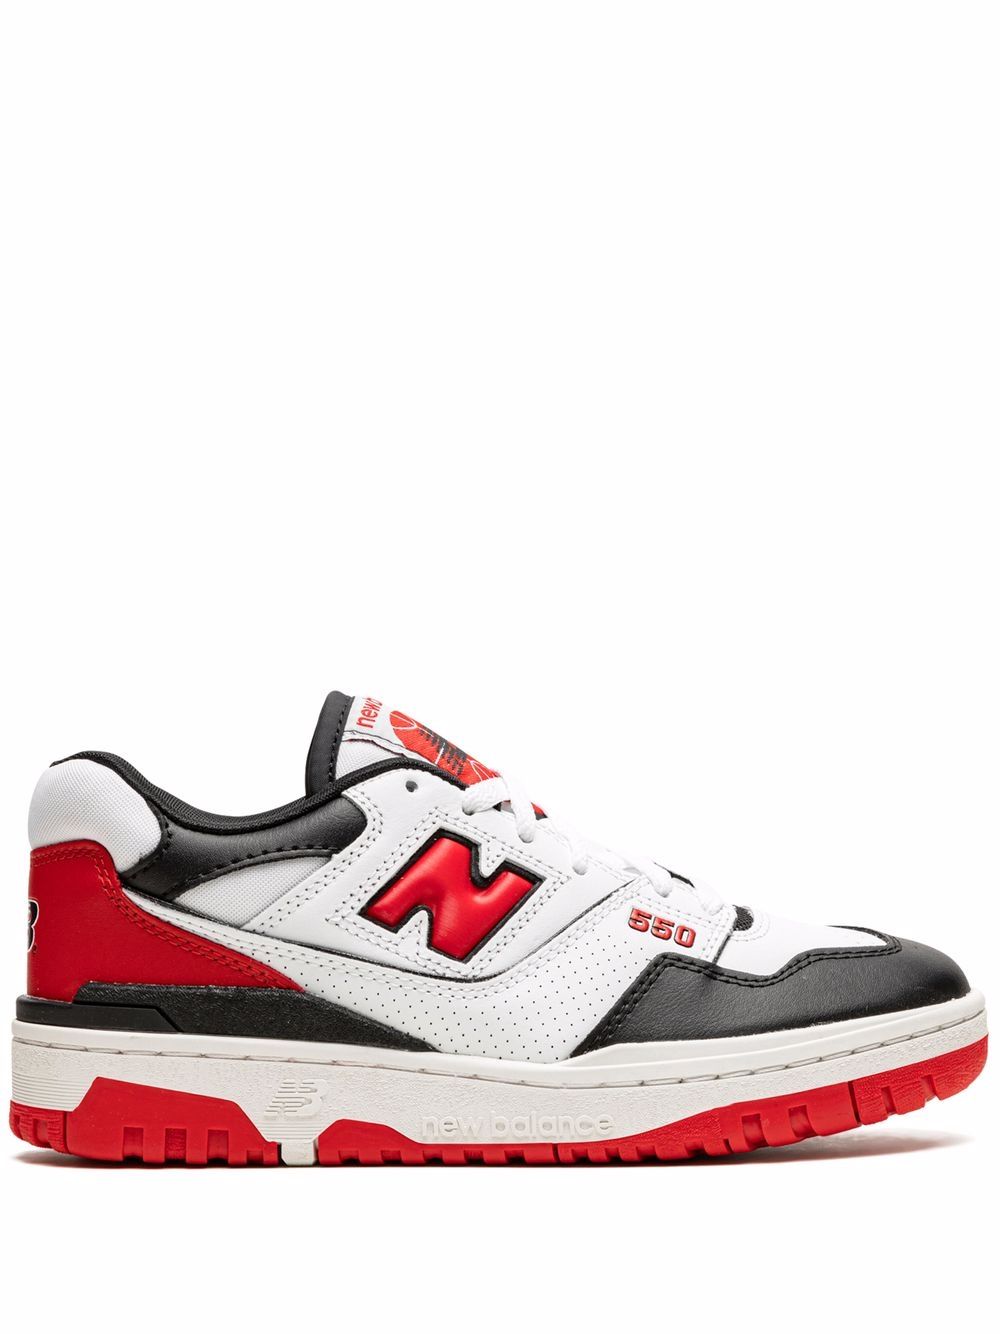 New Balance 550 "White/Red/Black" sneakers